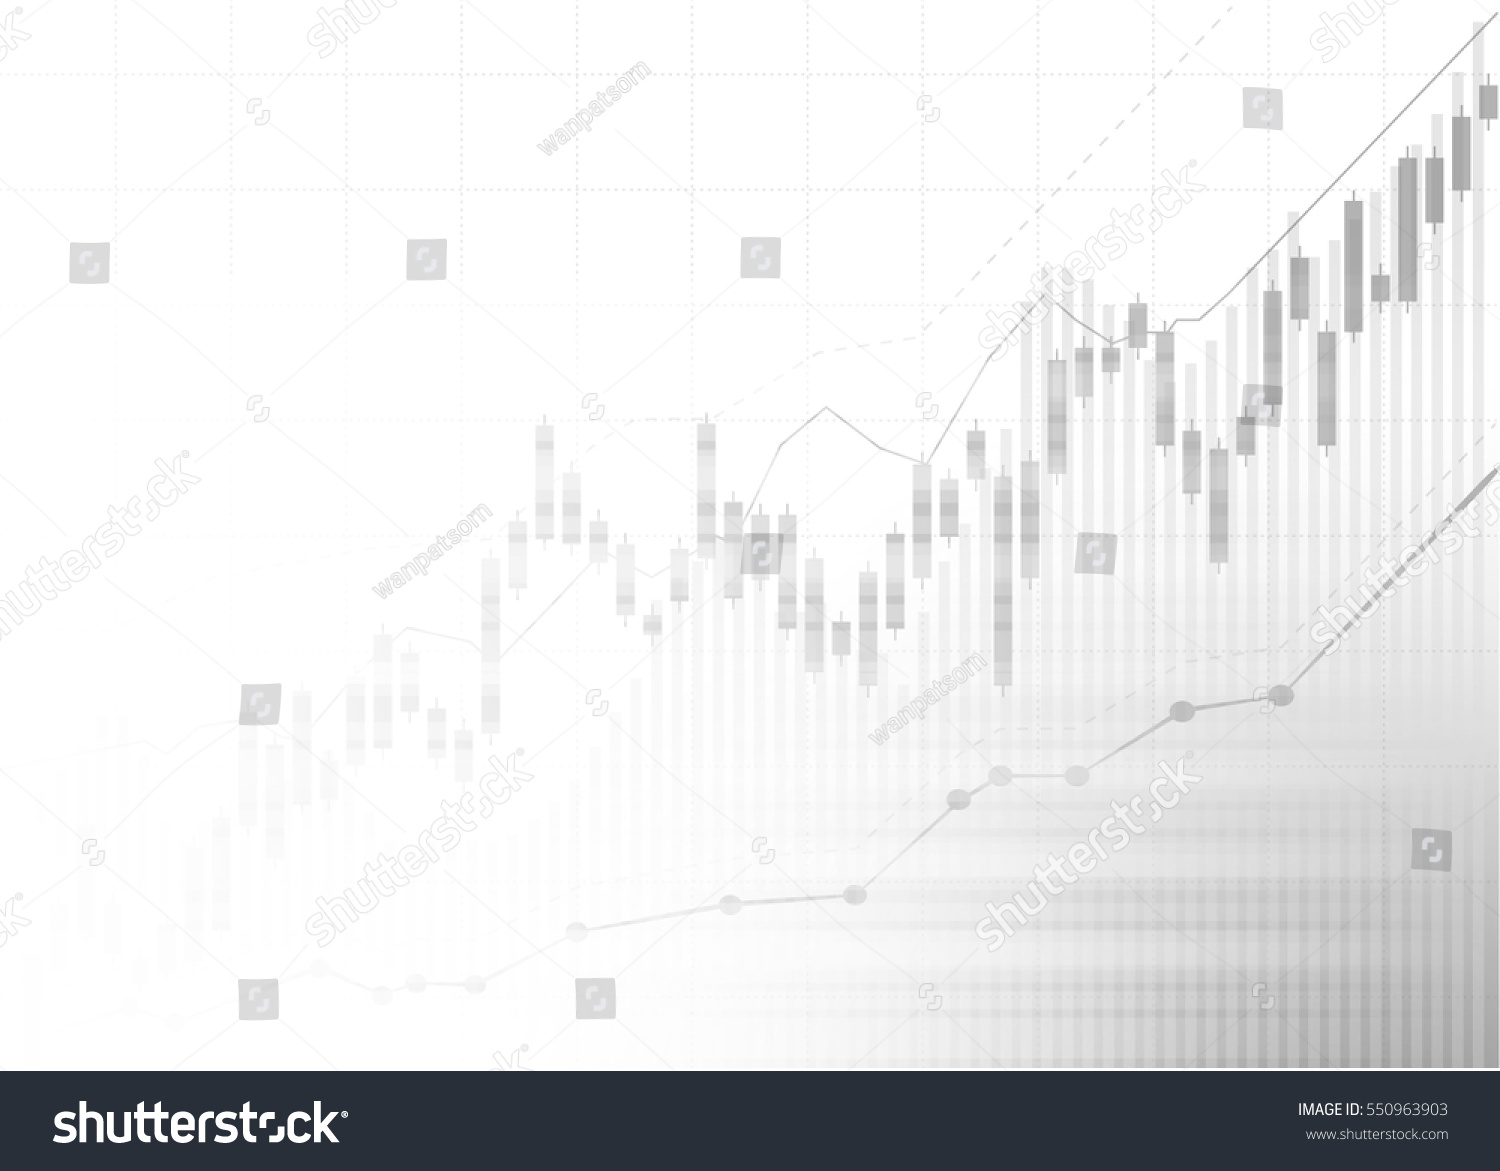 SVG of Candle stick graph chart of stock market investment trading, Bullish point, Bearish point. trend of graph vector design. svg